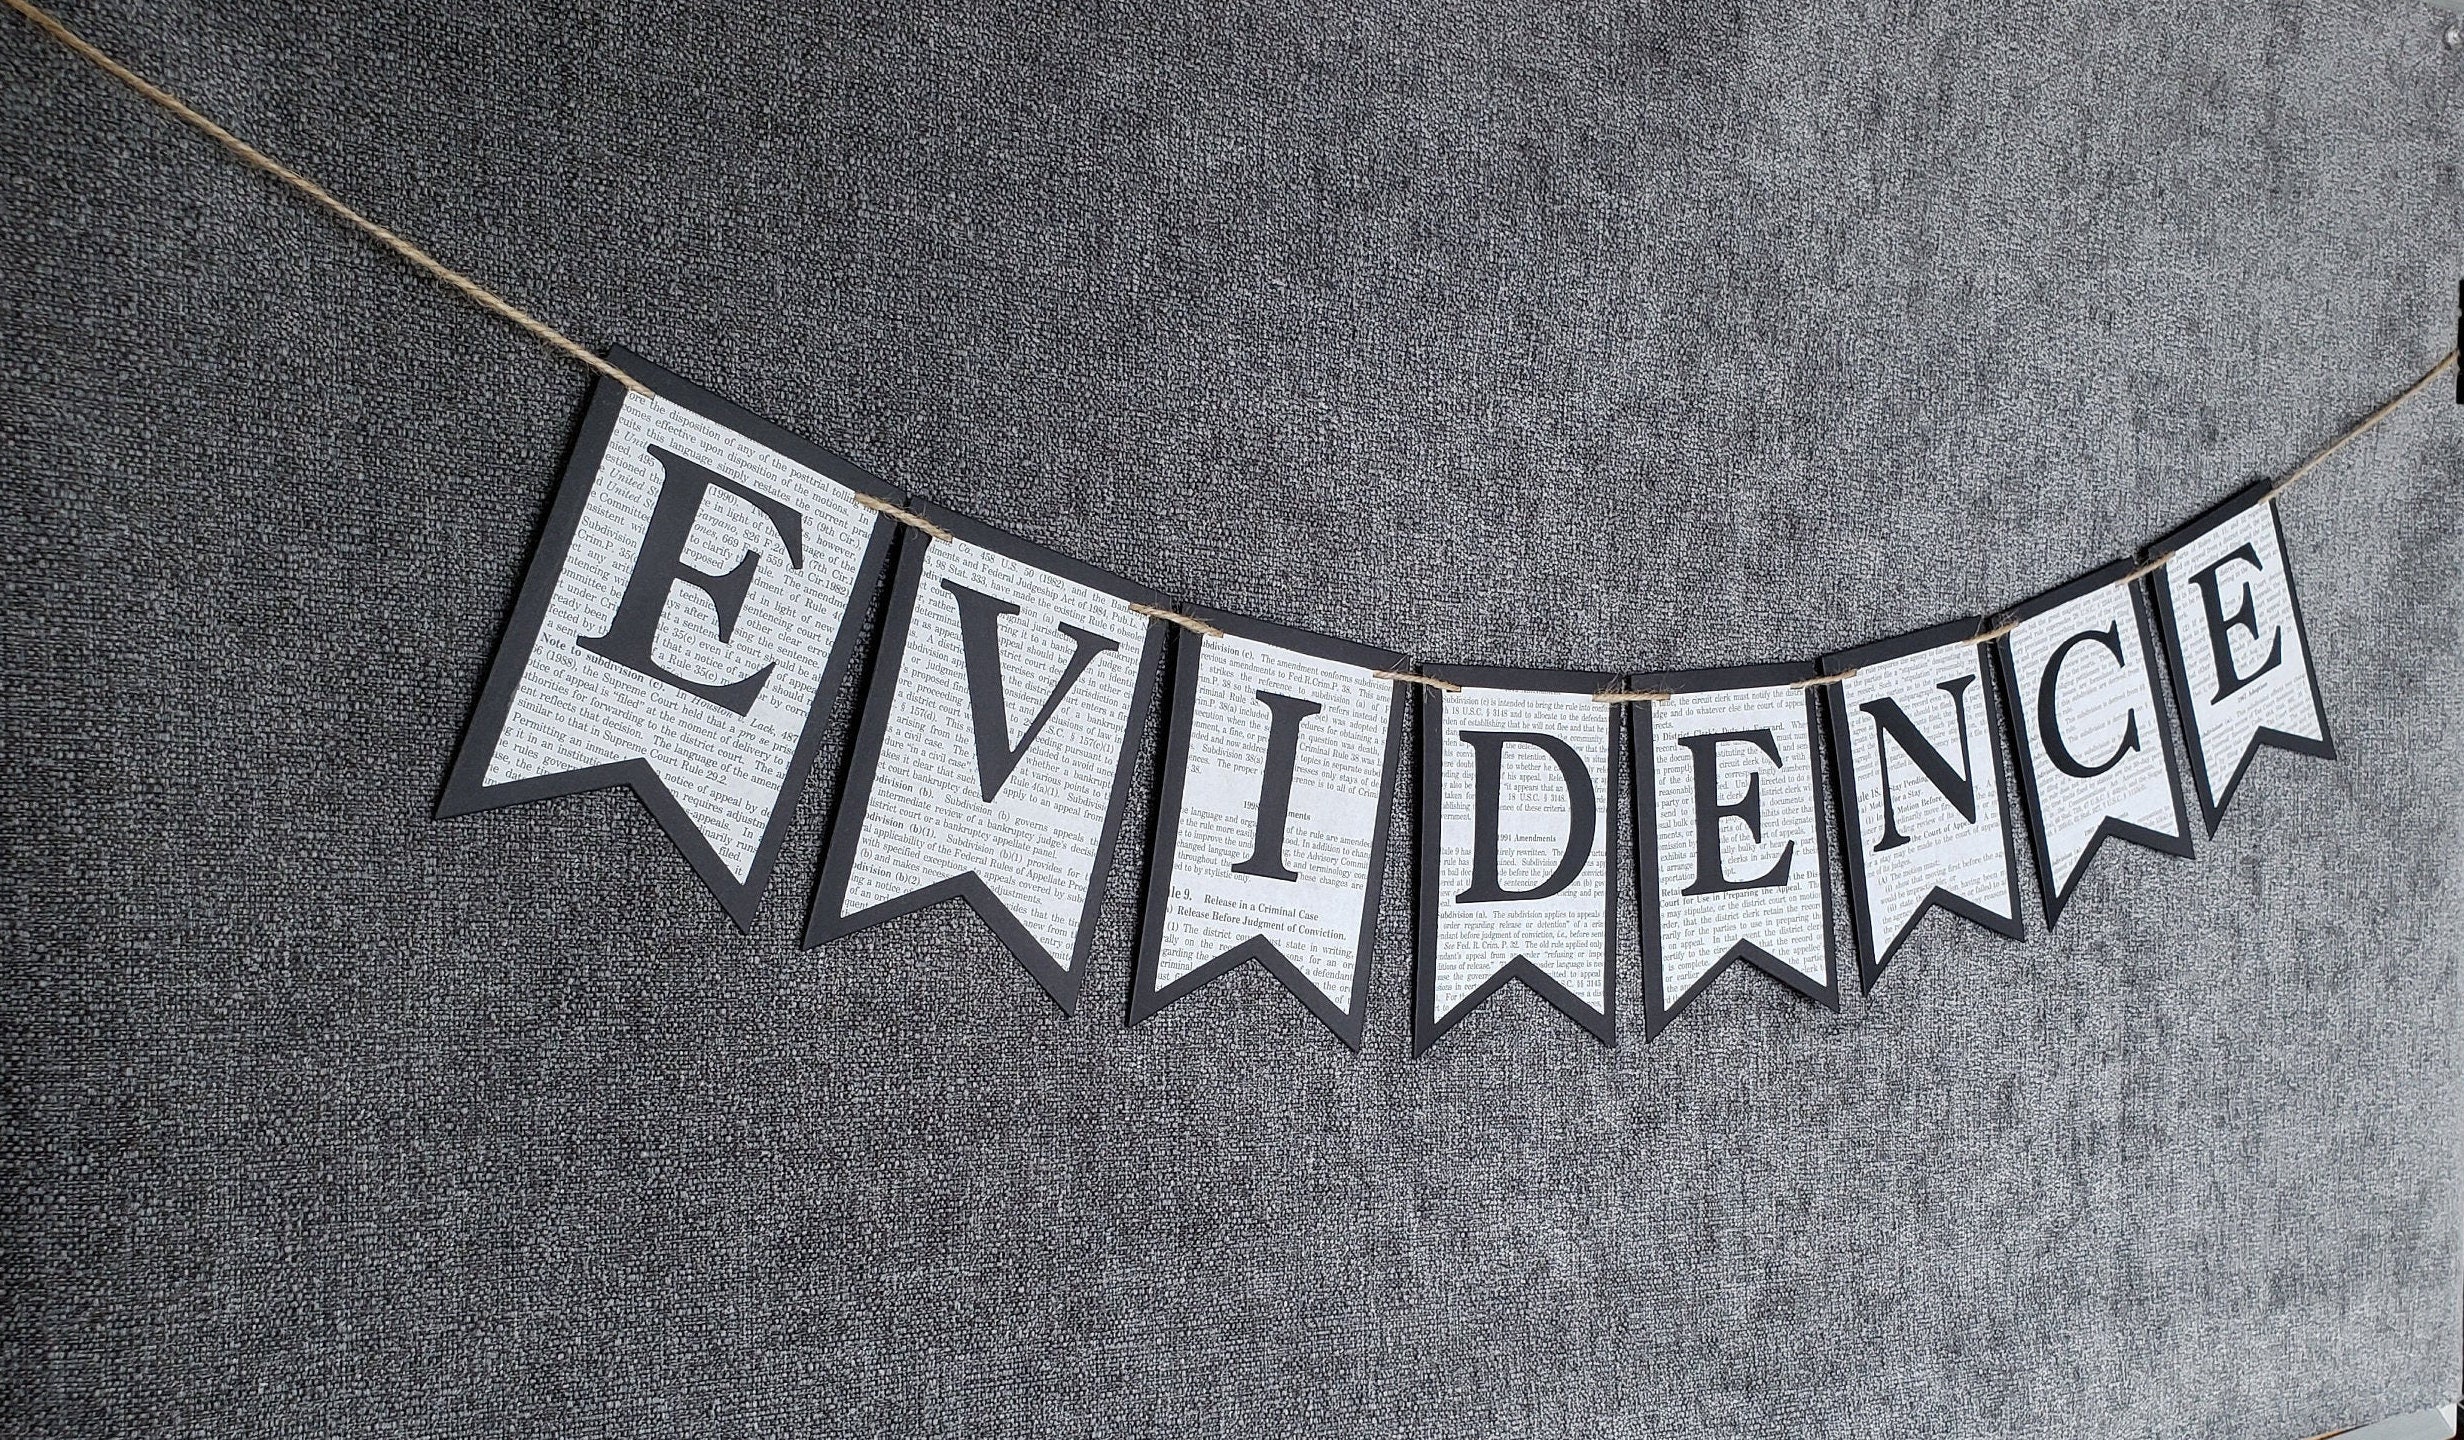 Evidence Vehicle Car Truck Magnet Sticker Decal Sign 12 X3 